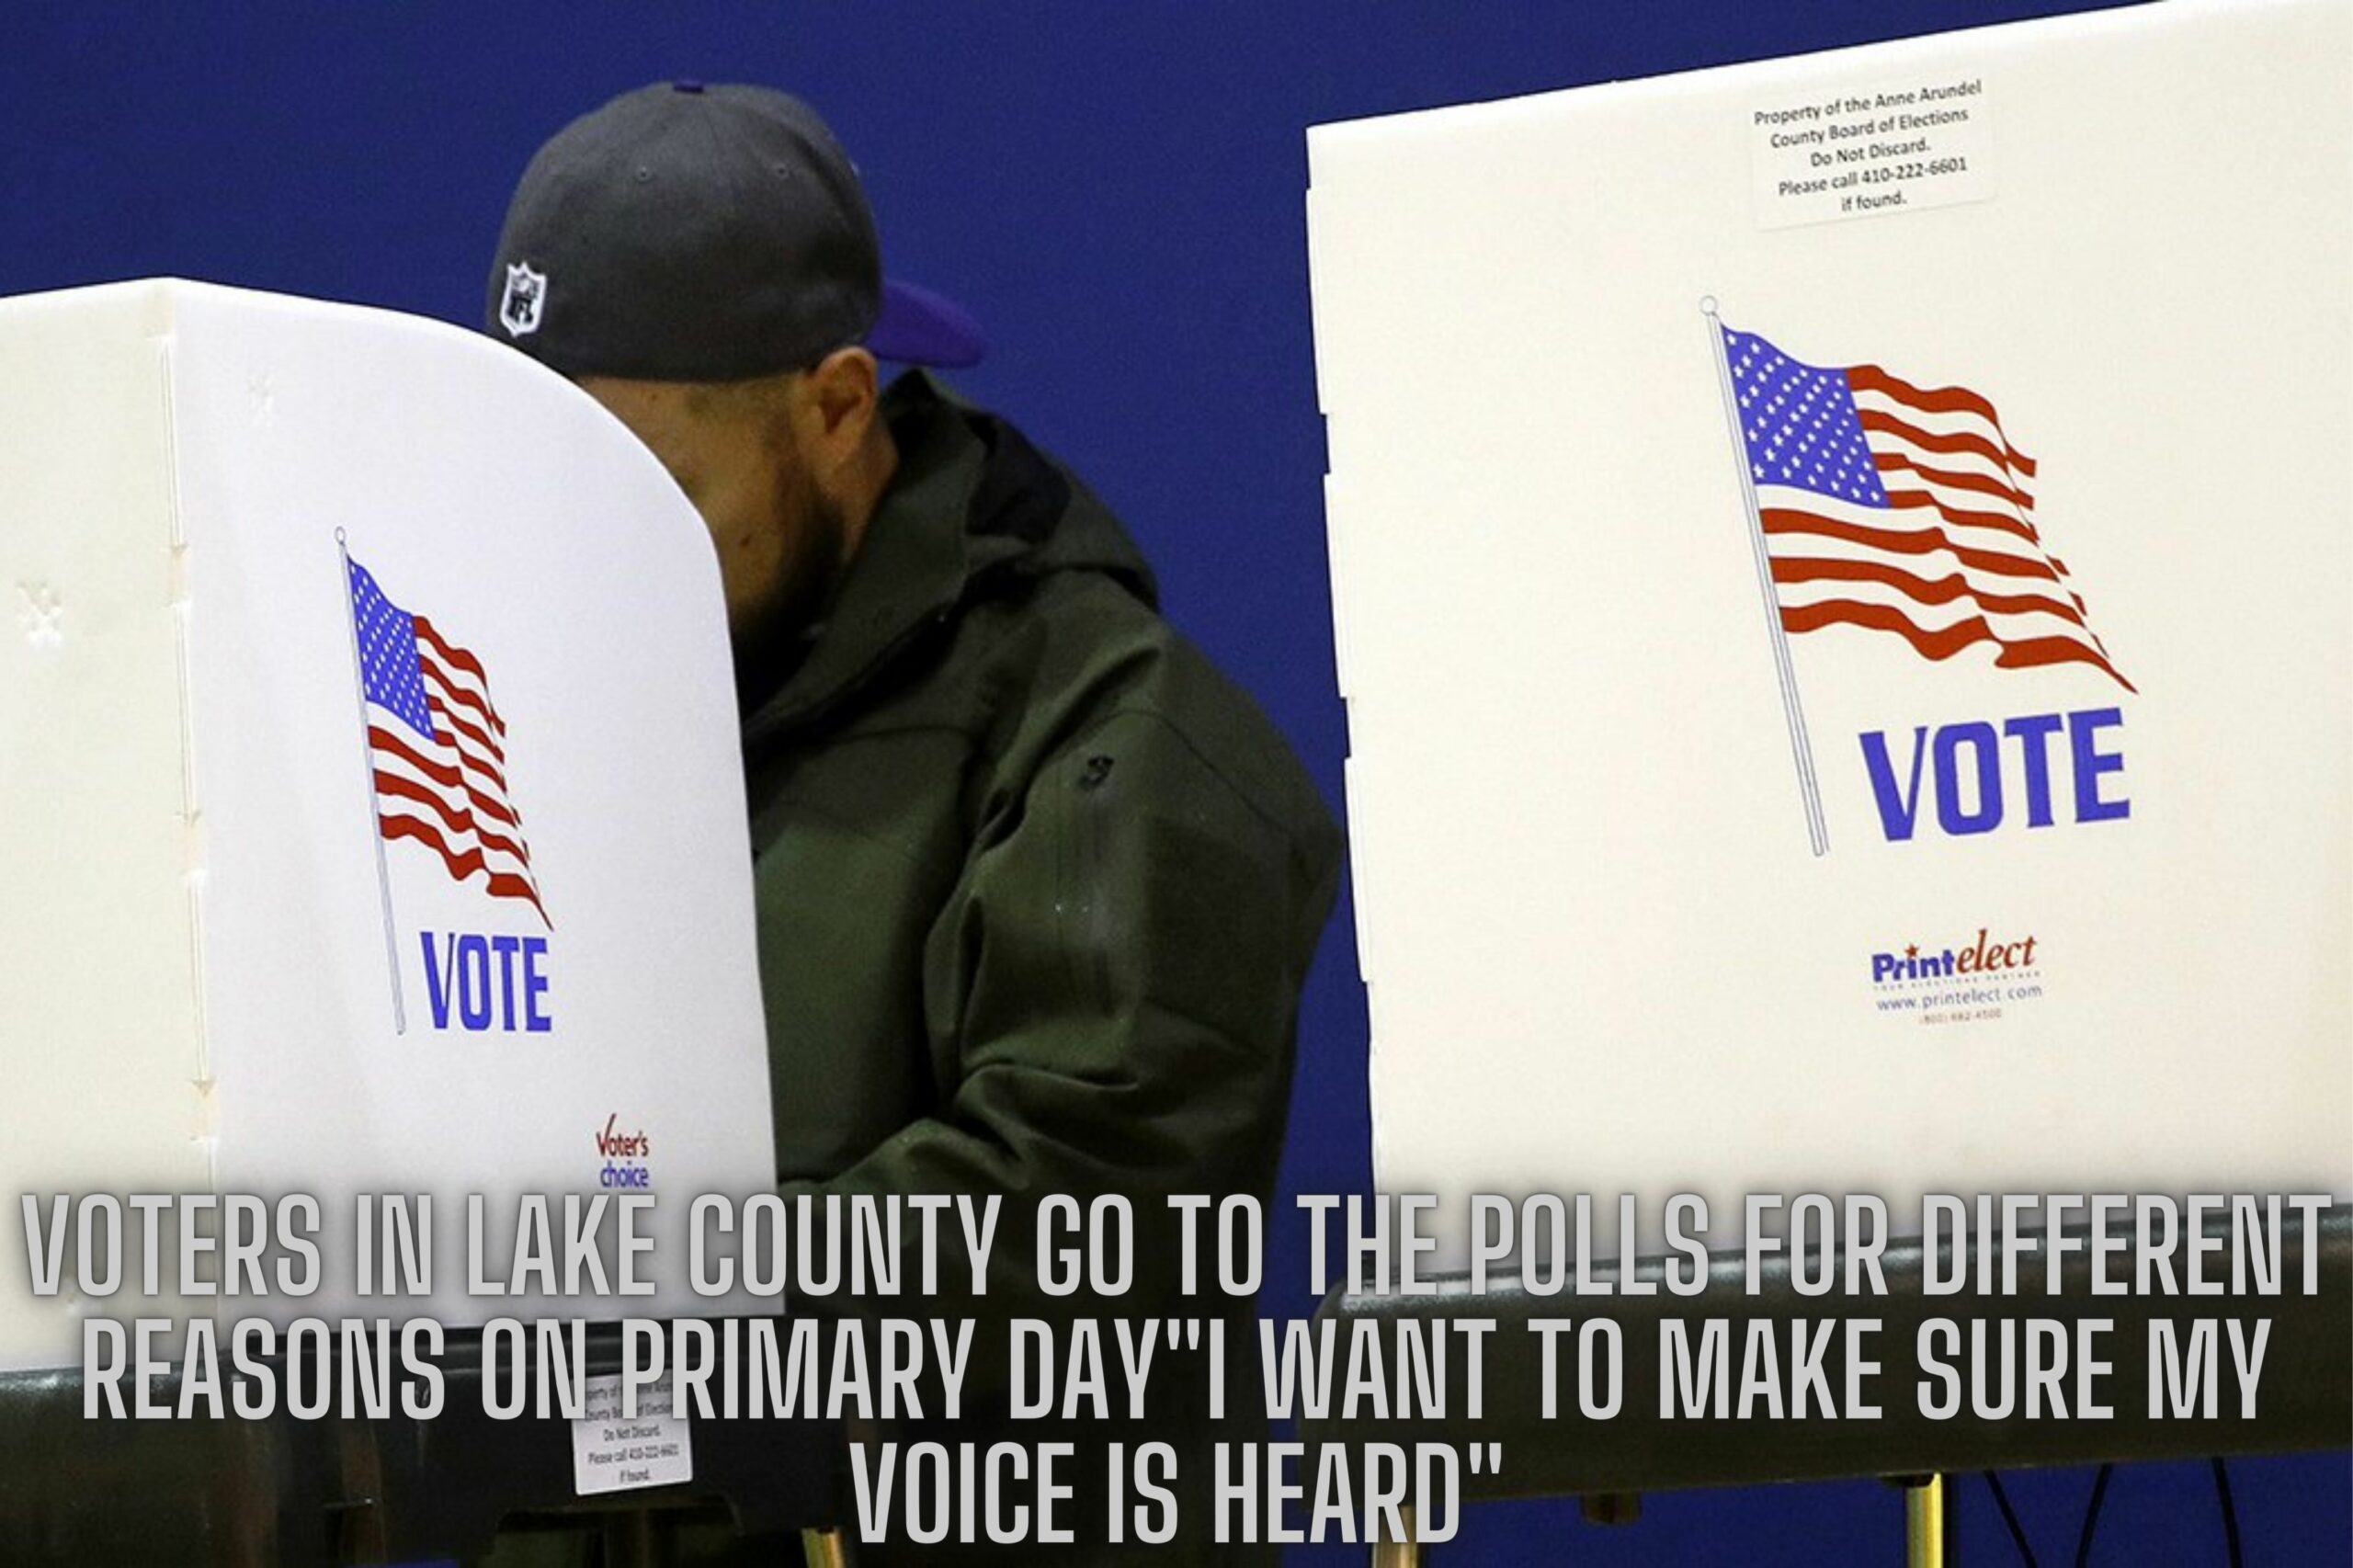 Voters In Lake County Go To The Polls For Different Reasons On Primary Day"I Want To Make Sure My Voice Is Heard"